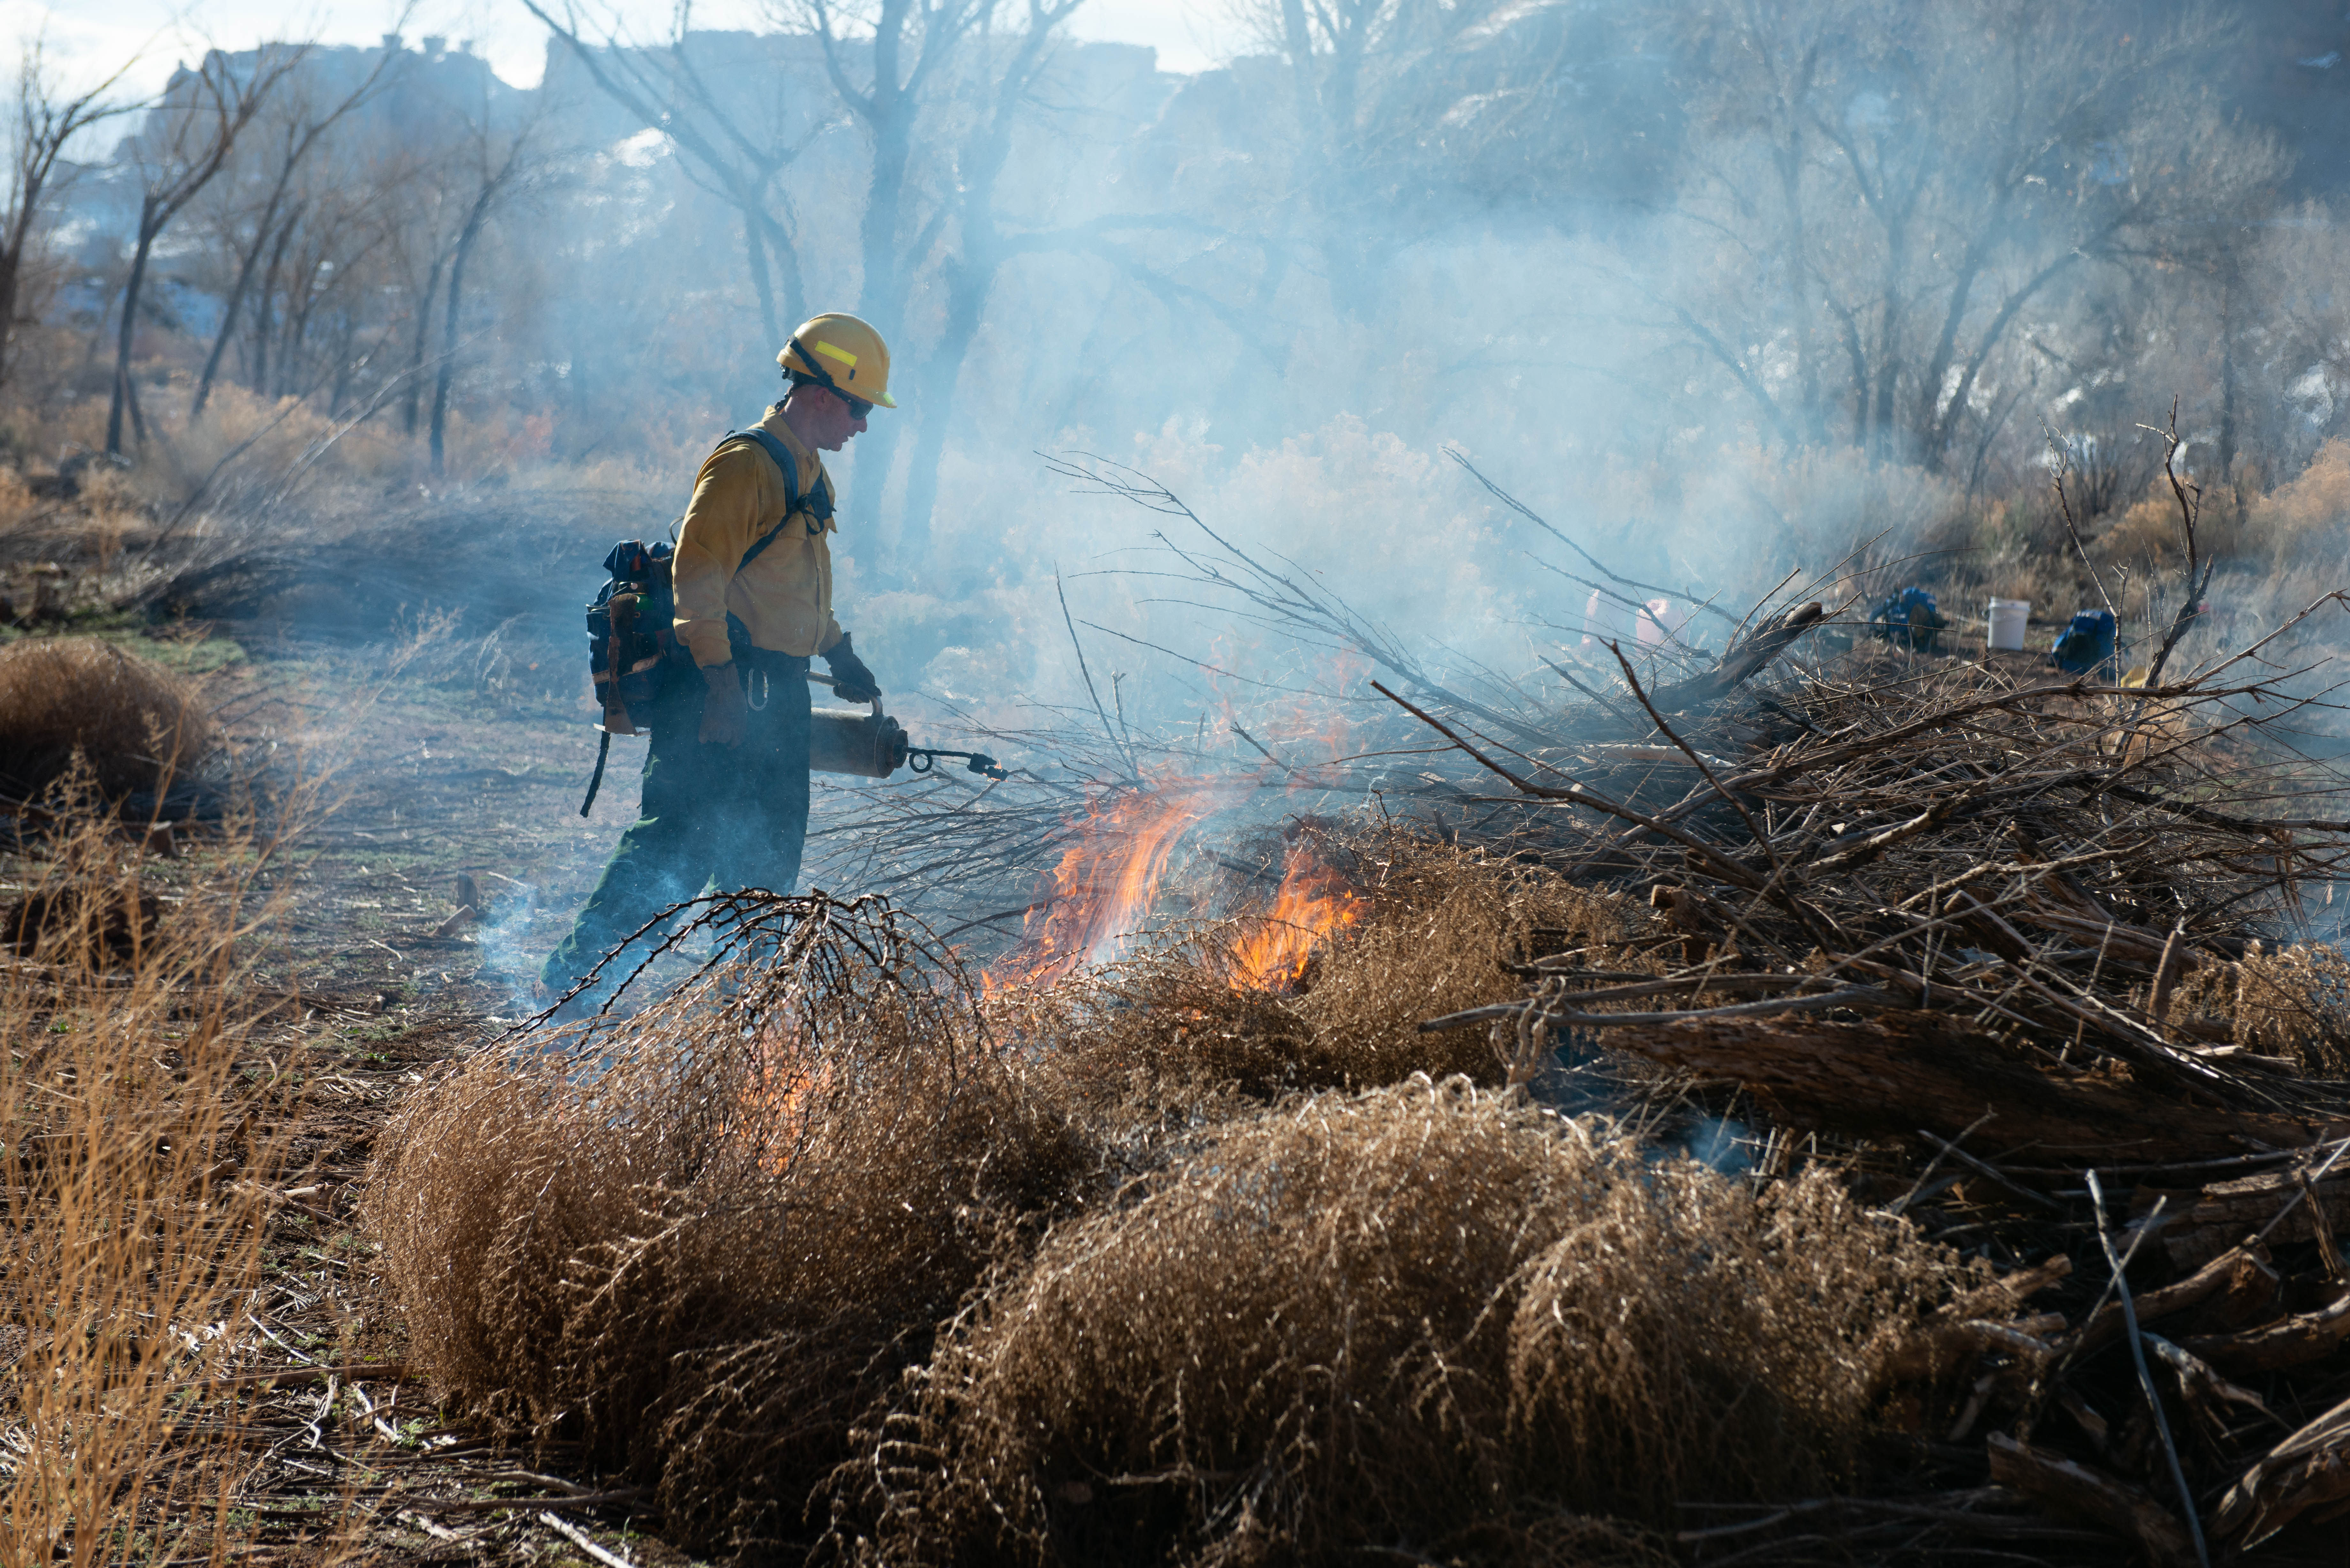 person in yellow hardhat and shirt uses drip torch to ignite pile of sticks and dead tumbleweed